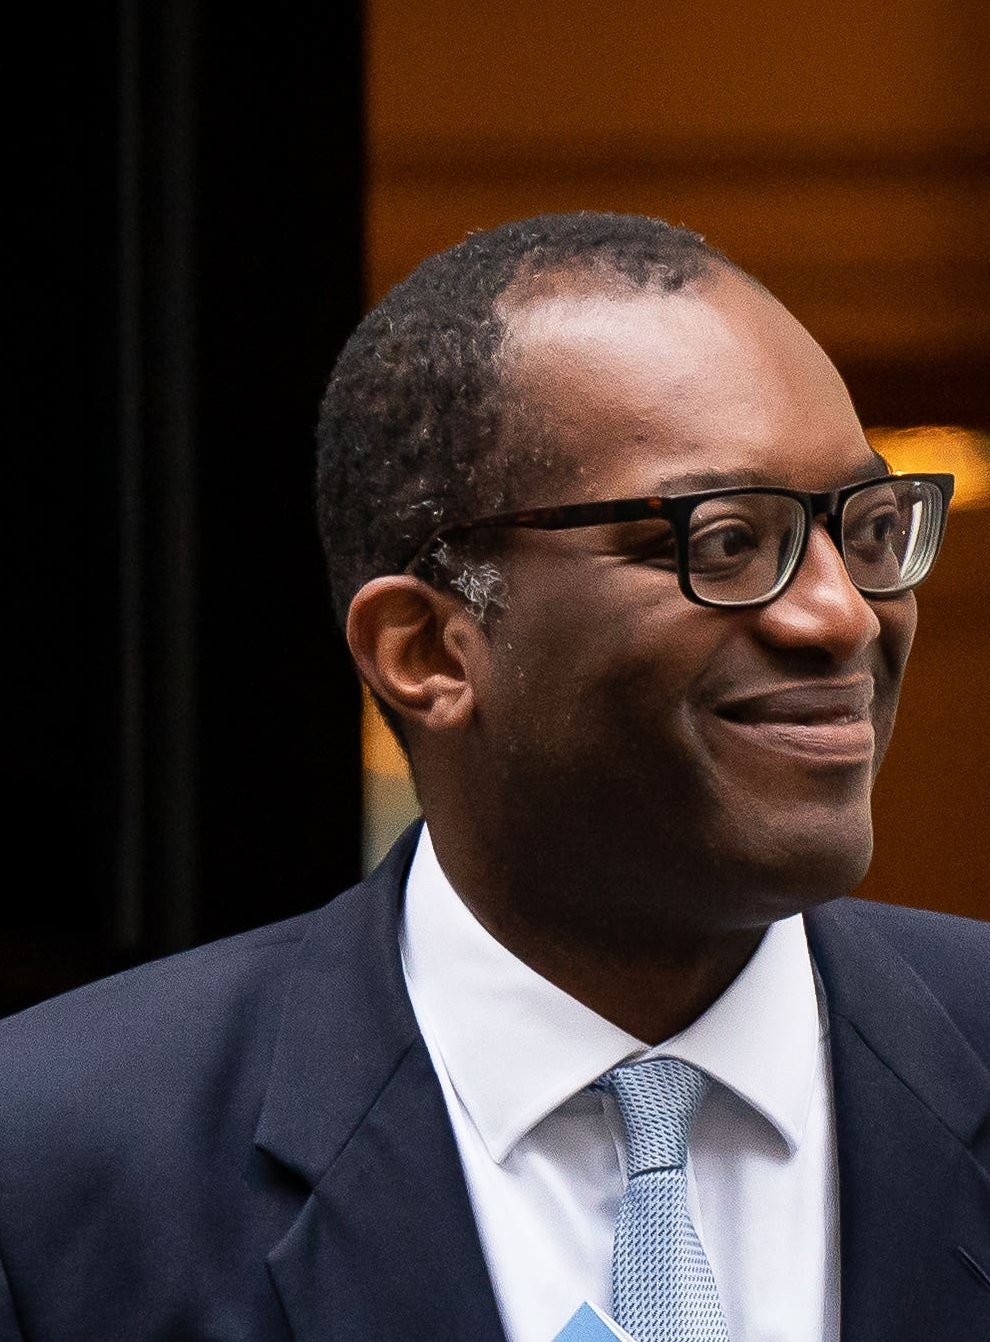 Chancellor of the Exchequer Kwasi Kwarteng leaves 11 Downing Street before delivering his mini-budget (PA)